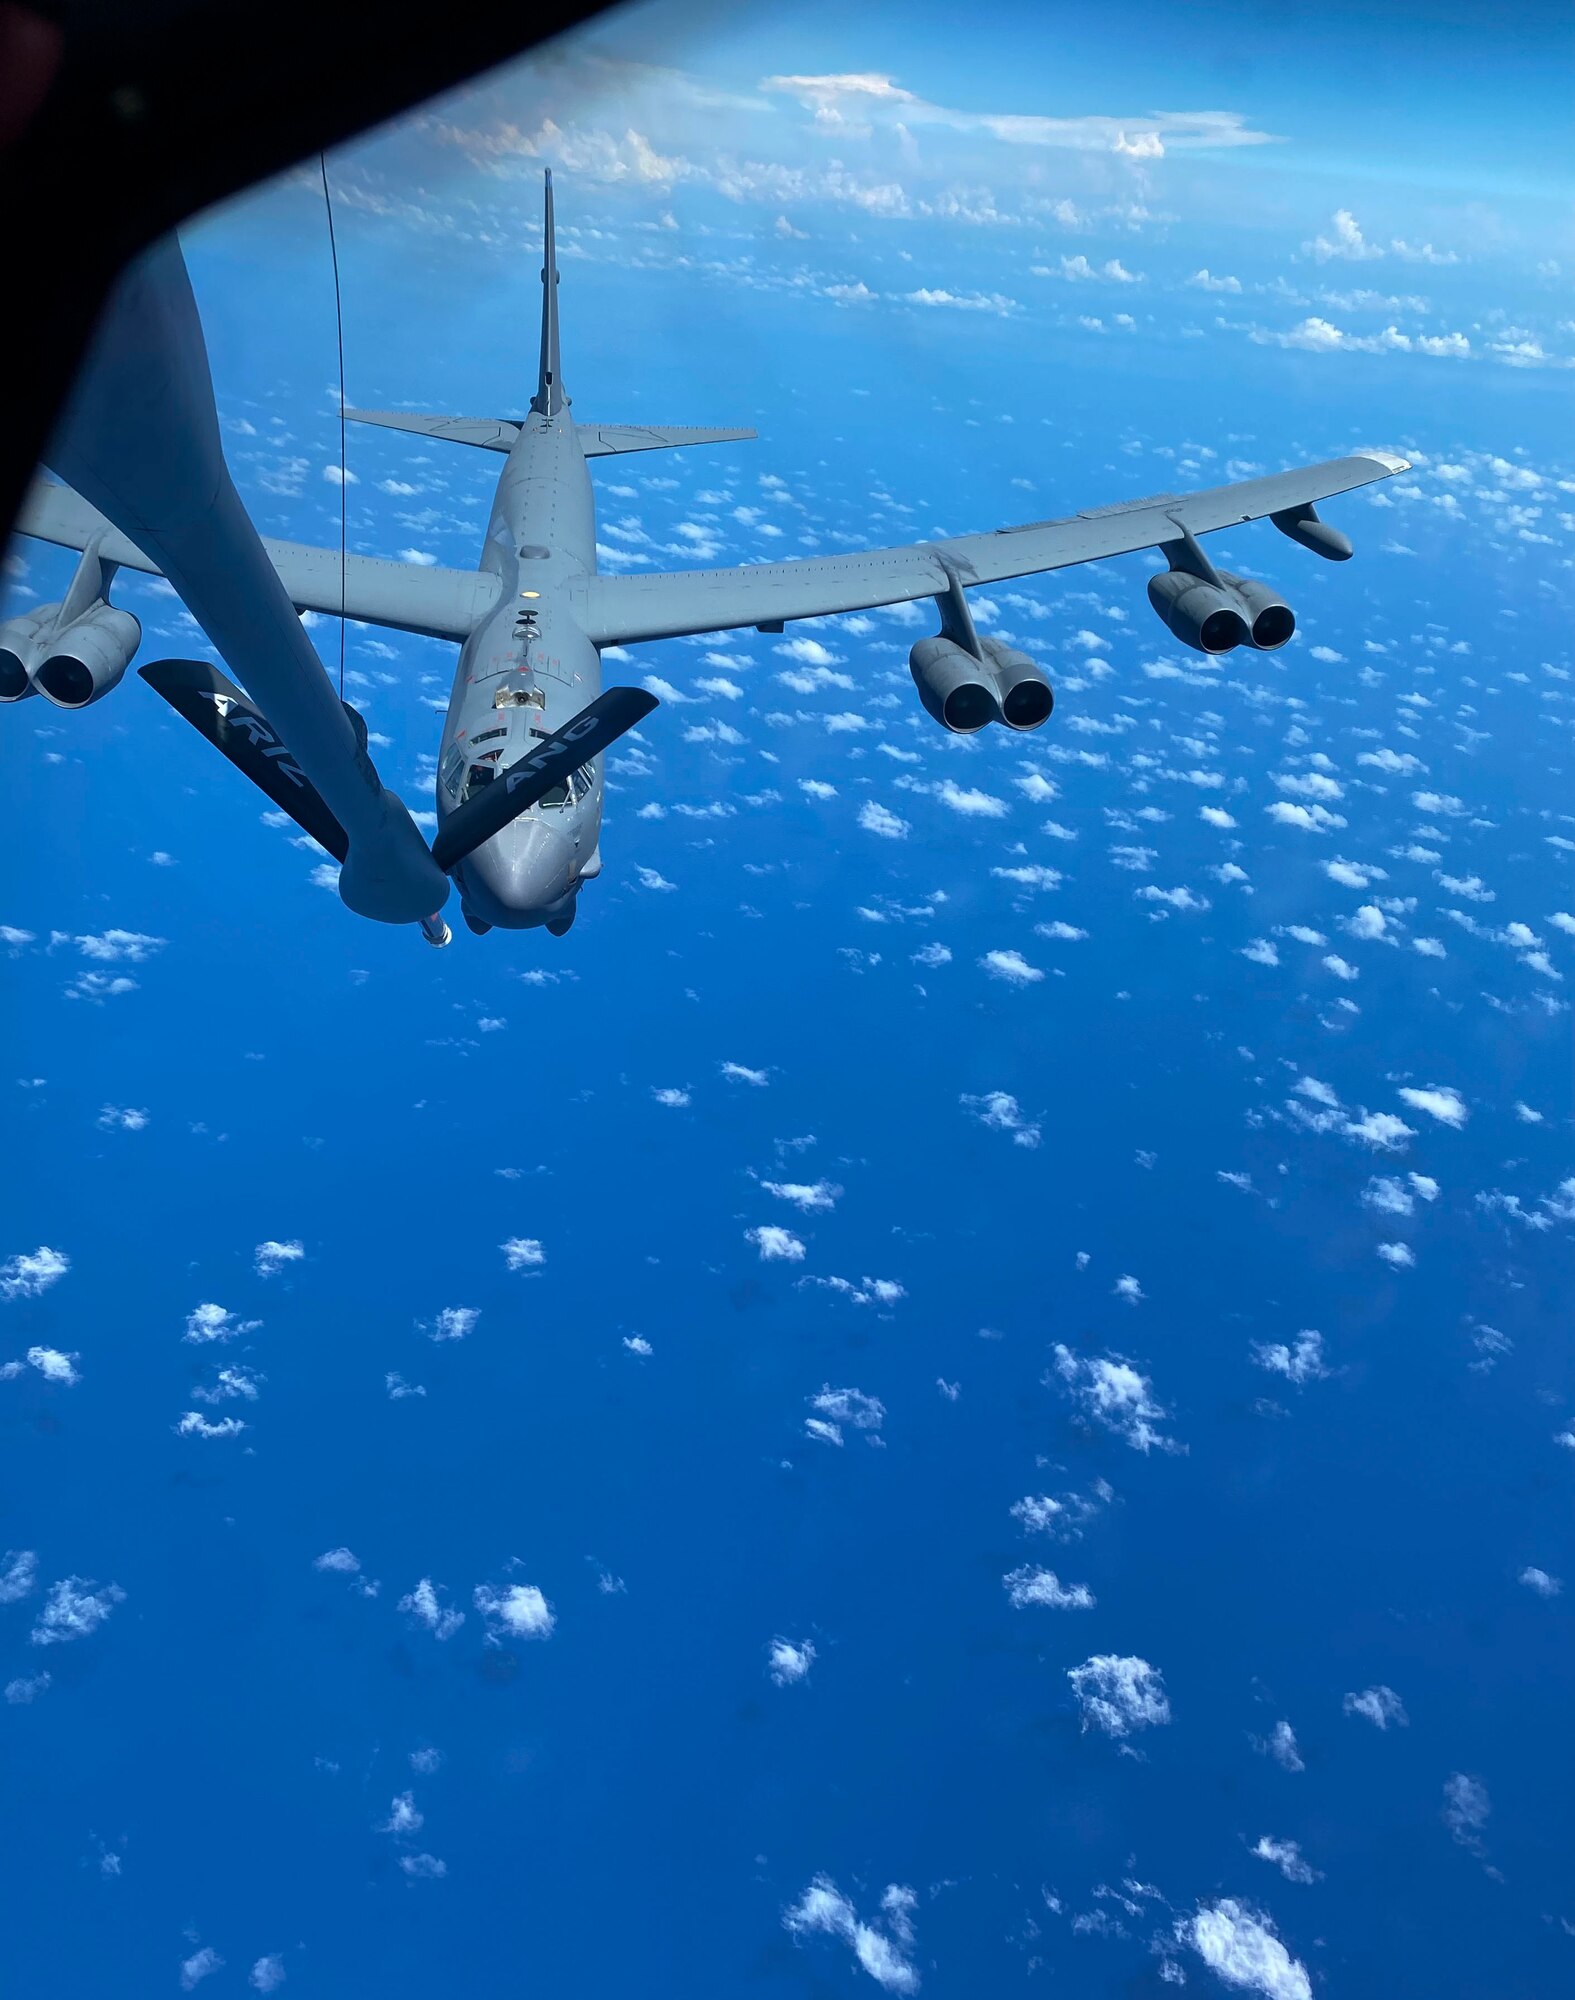 A U.S. Air Force B-52 Stratofortress assigned to the 2nd Bomb Wing, Barksdale Air Force Base, Louisiana, receives fuel from a U.S. Air Force KC-135 Stratotanker assigned to the 506th Expeditionary Air Refueling Squadron during a Bomber Task Force mission over the Philippine Sea, April 26, 2023. Air-to-air refueling capabilities are a key logistical enabler of U.S., allied, and partner nations’ aircraft, protecting prosperity, peace, and stability across the Pacific.A 161st Air Refueling Wing co-pilot assigned to the 506th Expeditionary Air Refueling Squadron flies a KC-135 Stratotanker from Andersen Air Force Base, Guam in preparation for a Bomber Task Force refueling mission over the Philippine Sea on April 26, 2023. Air-to-air refueling capabilities are a key logistical enabler of U.S., allied, and partner nations’ aircraft, protecting prosperity, peace, and stability across the Pacific. (U.S. Air Force Photo by Capt. Katie Mueller)